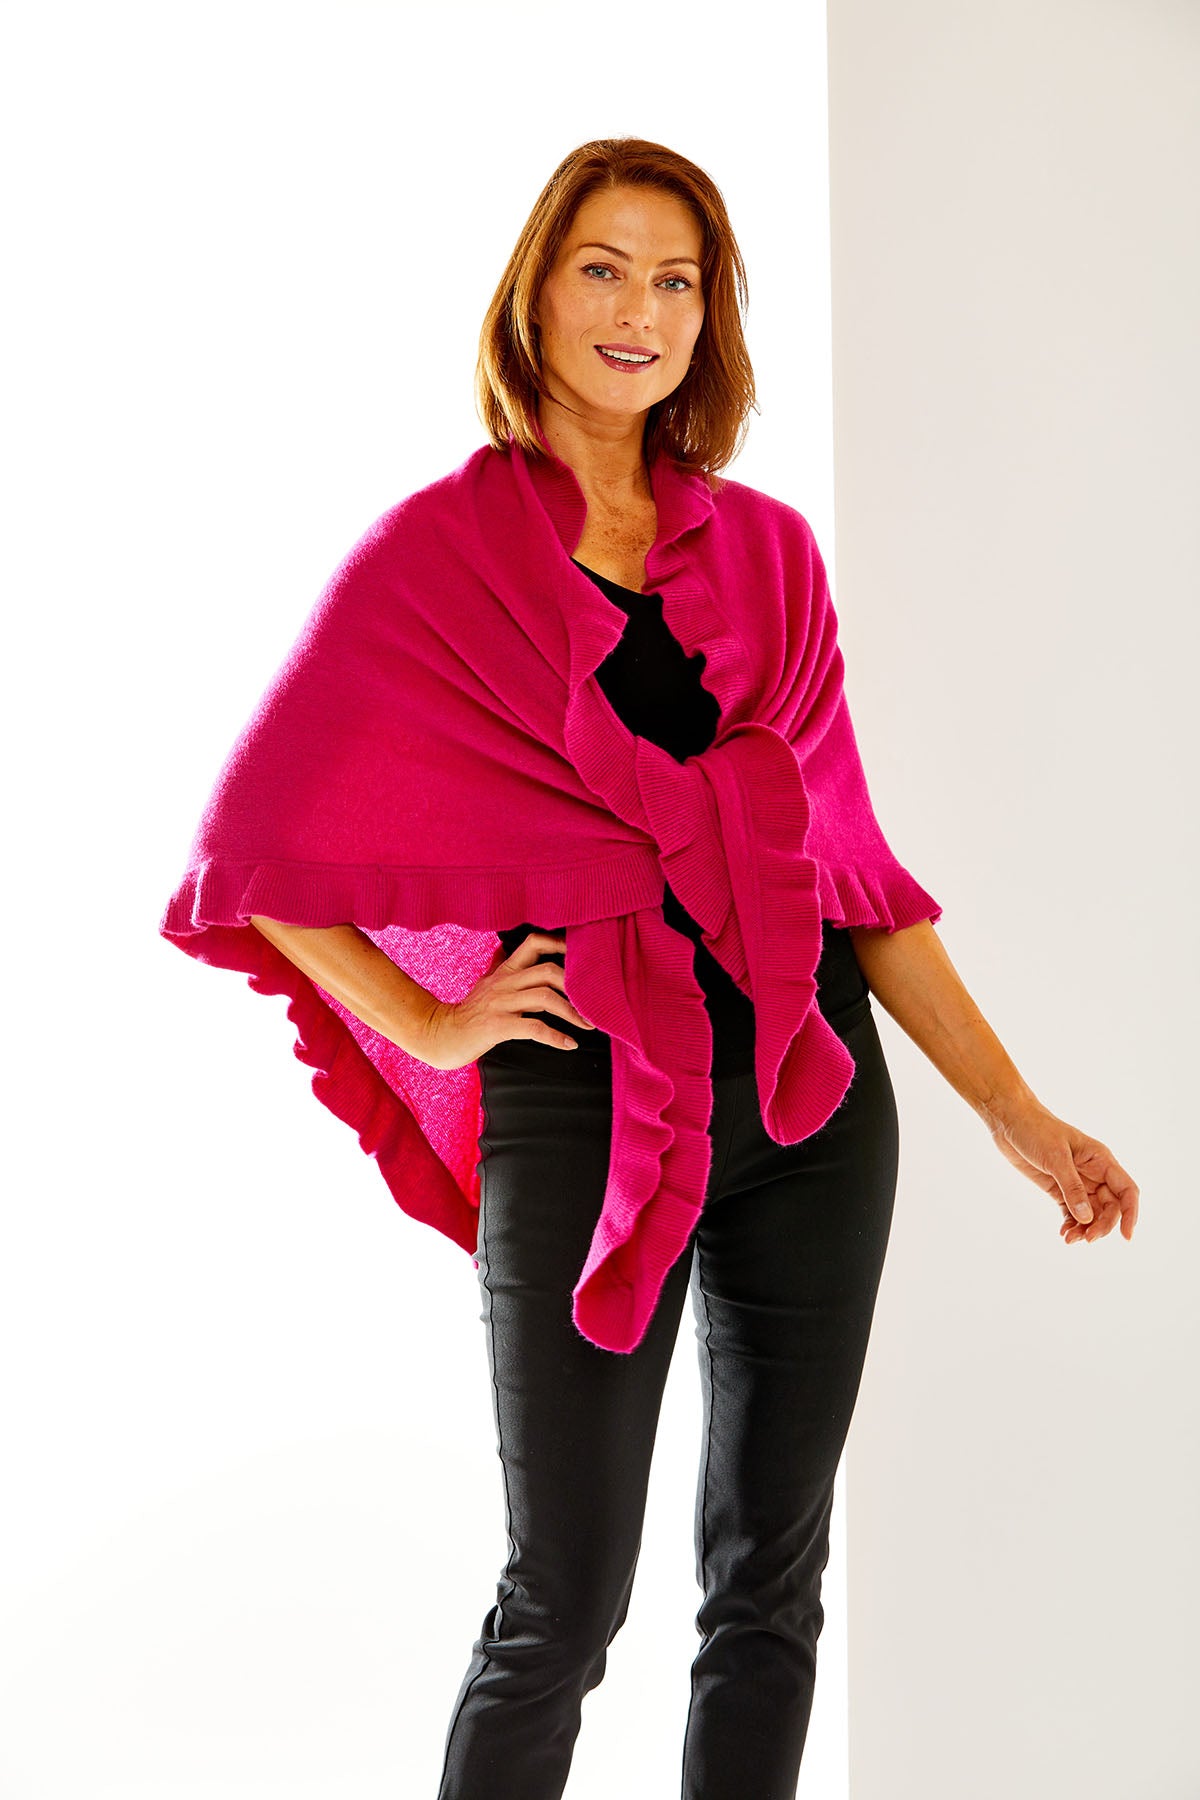 Boysenberry cashmere wrap with ruffle edge. Perfect for everyday wear and as a cocktail attire accessory